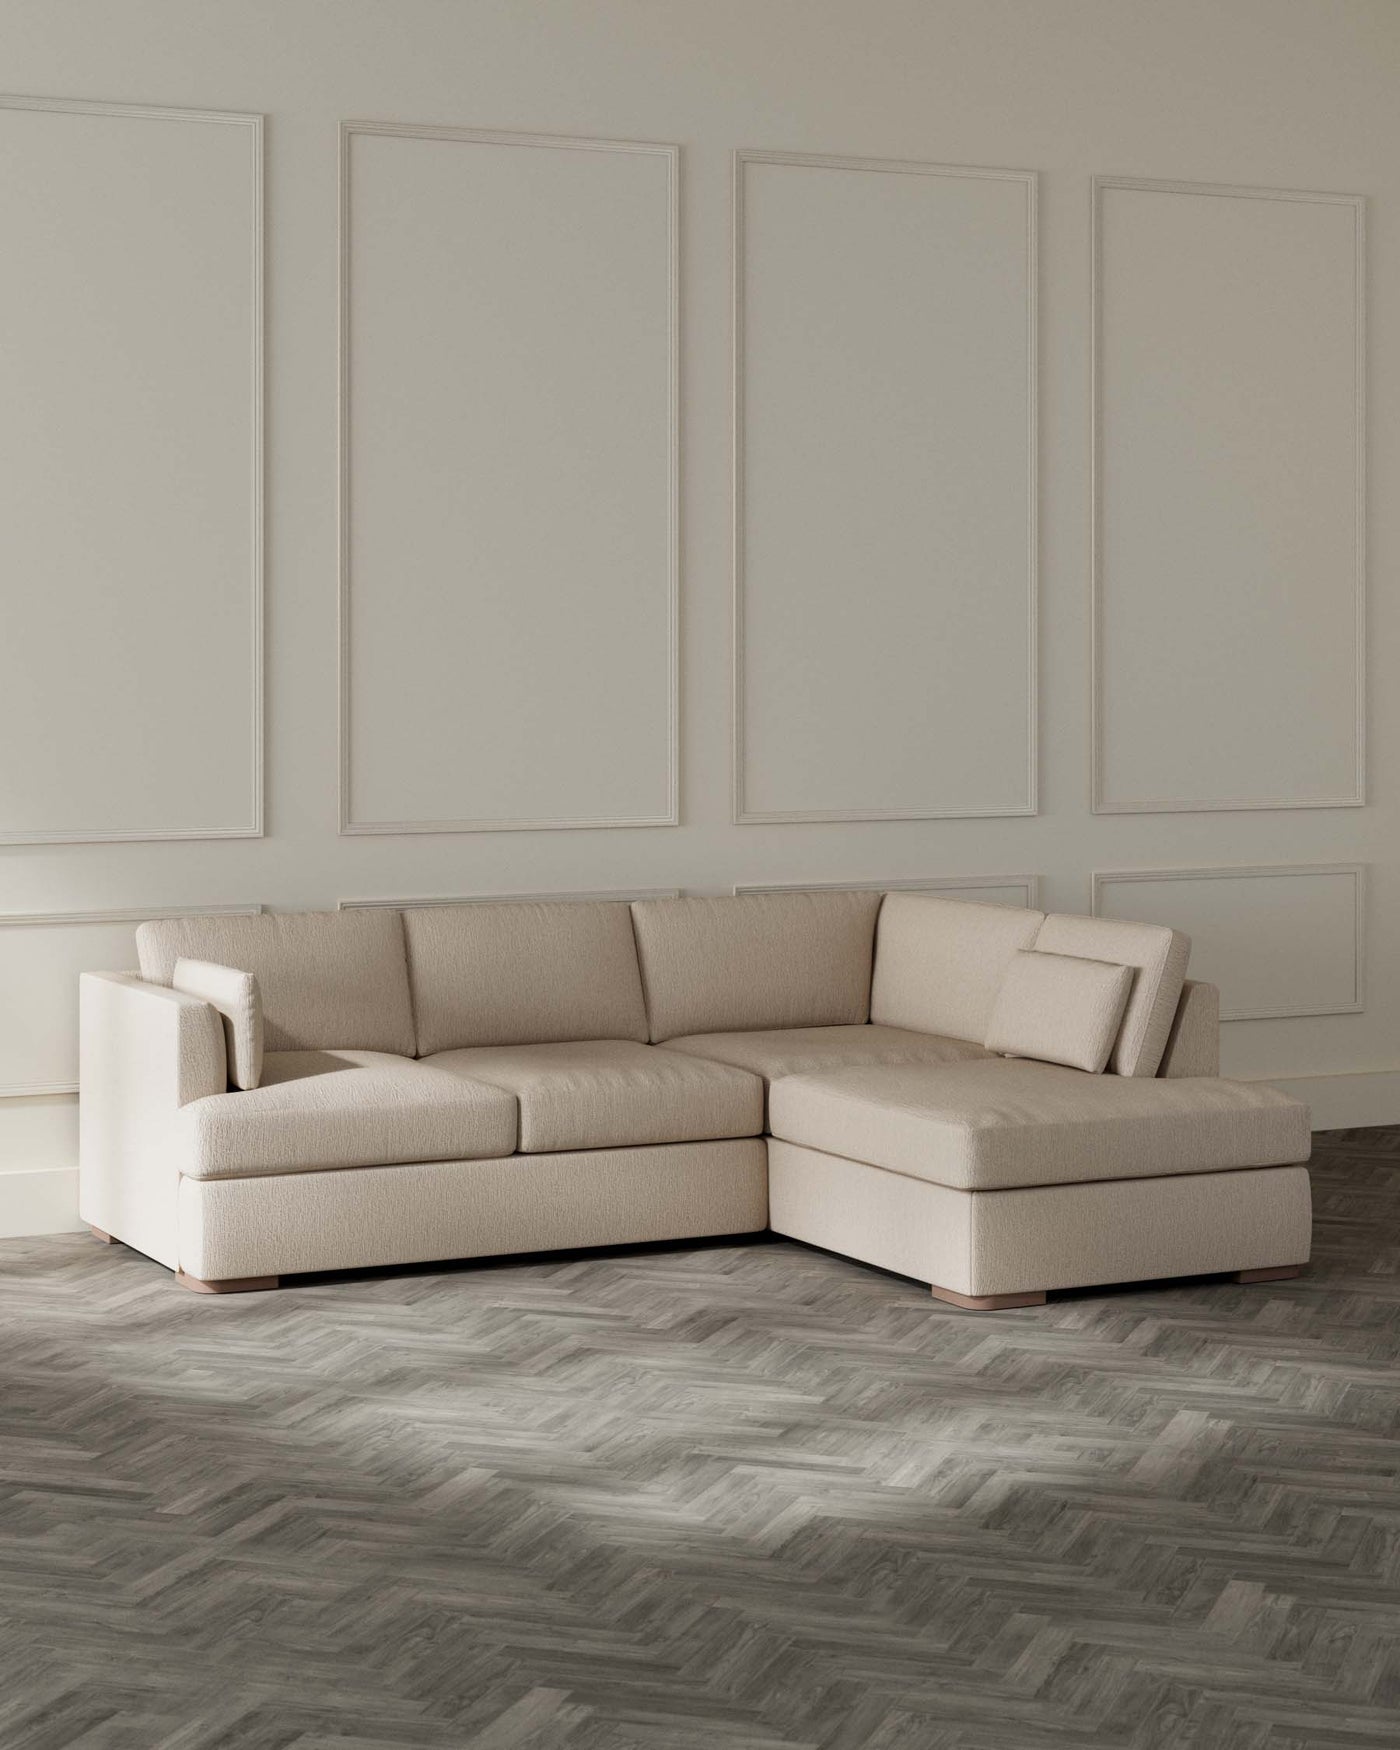 Contemporary L-shaped sectional sofa with a light beige fabric upholstery and clean lines, featuring plush back cushions and a chaise lounge extension, set on a dark herringbone-patterned floor with a neutral wall punctuated by decorative mouldings in the background.